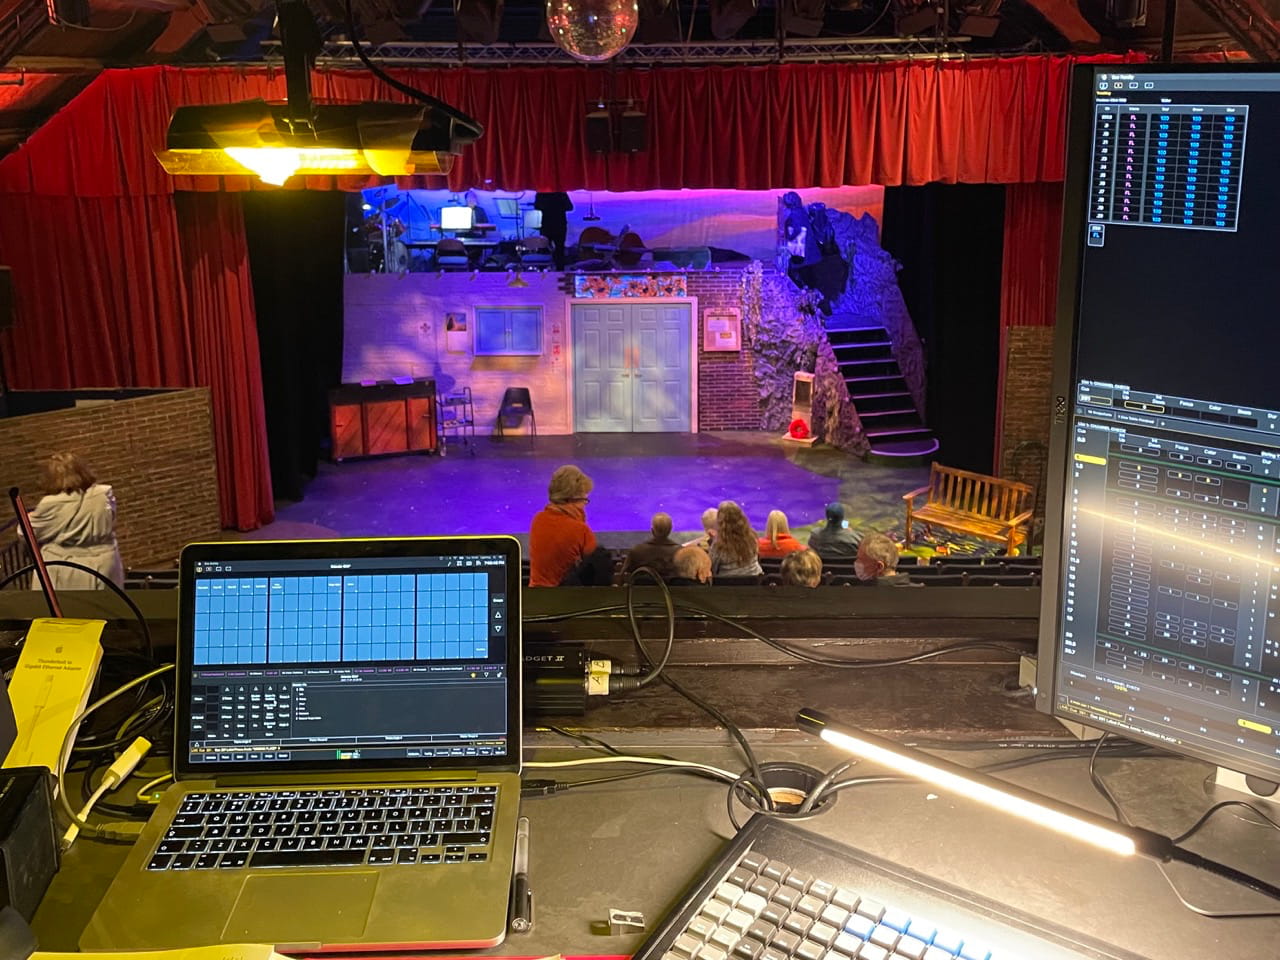 The view from the lighting box, showing my MacBook Pro running Eos.